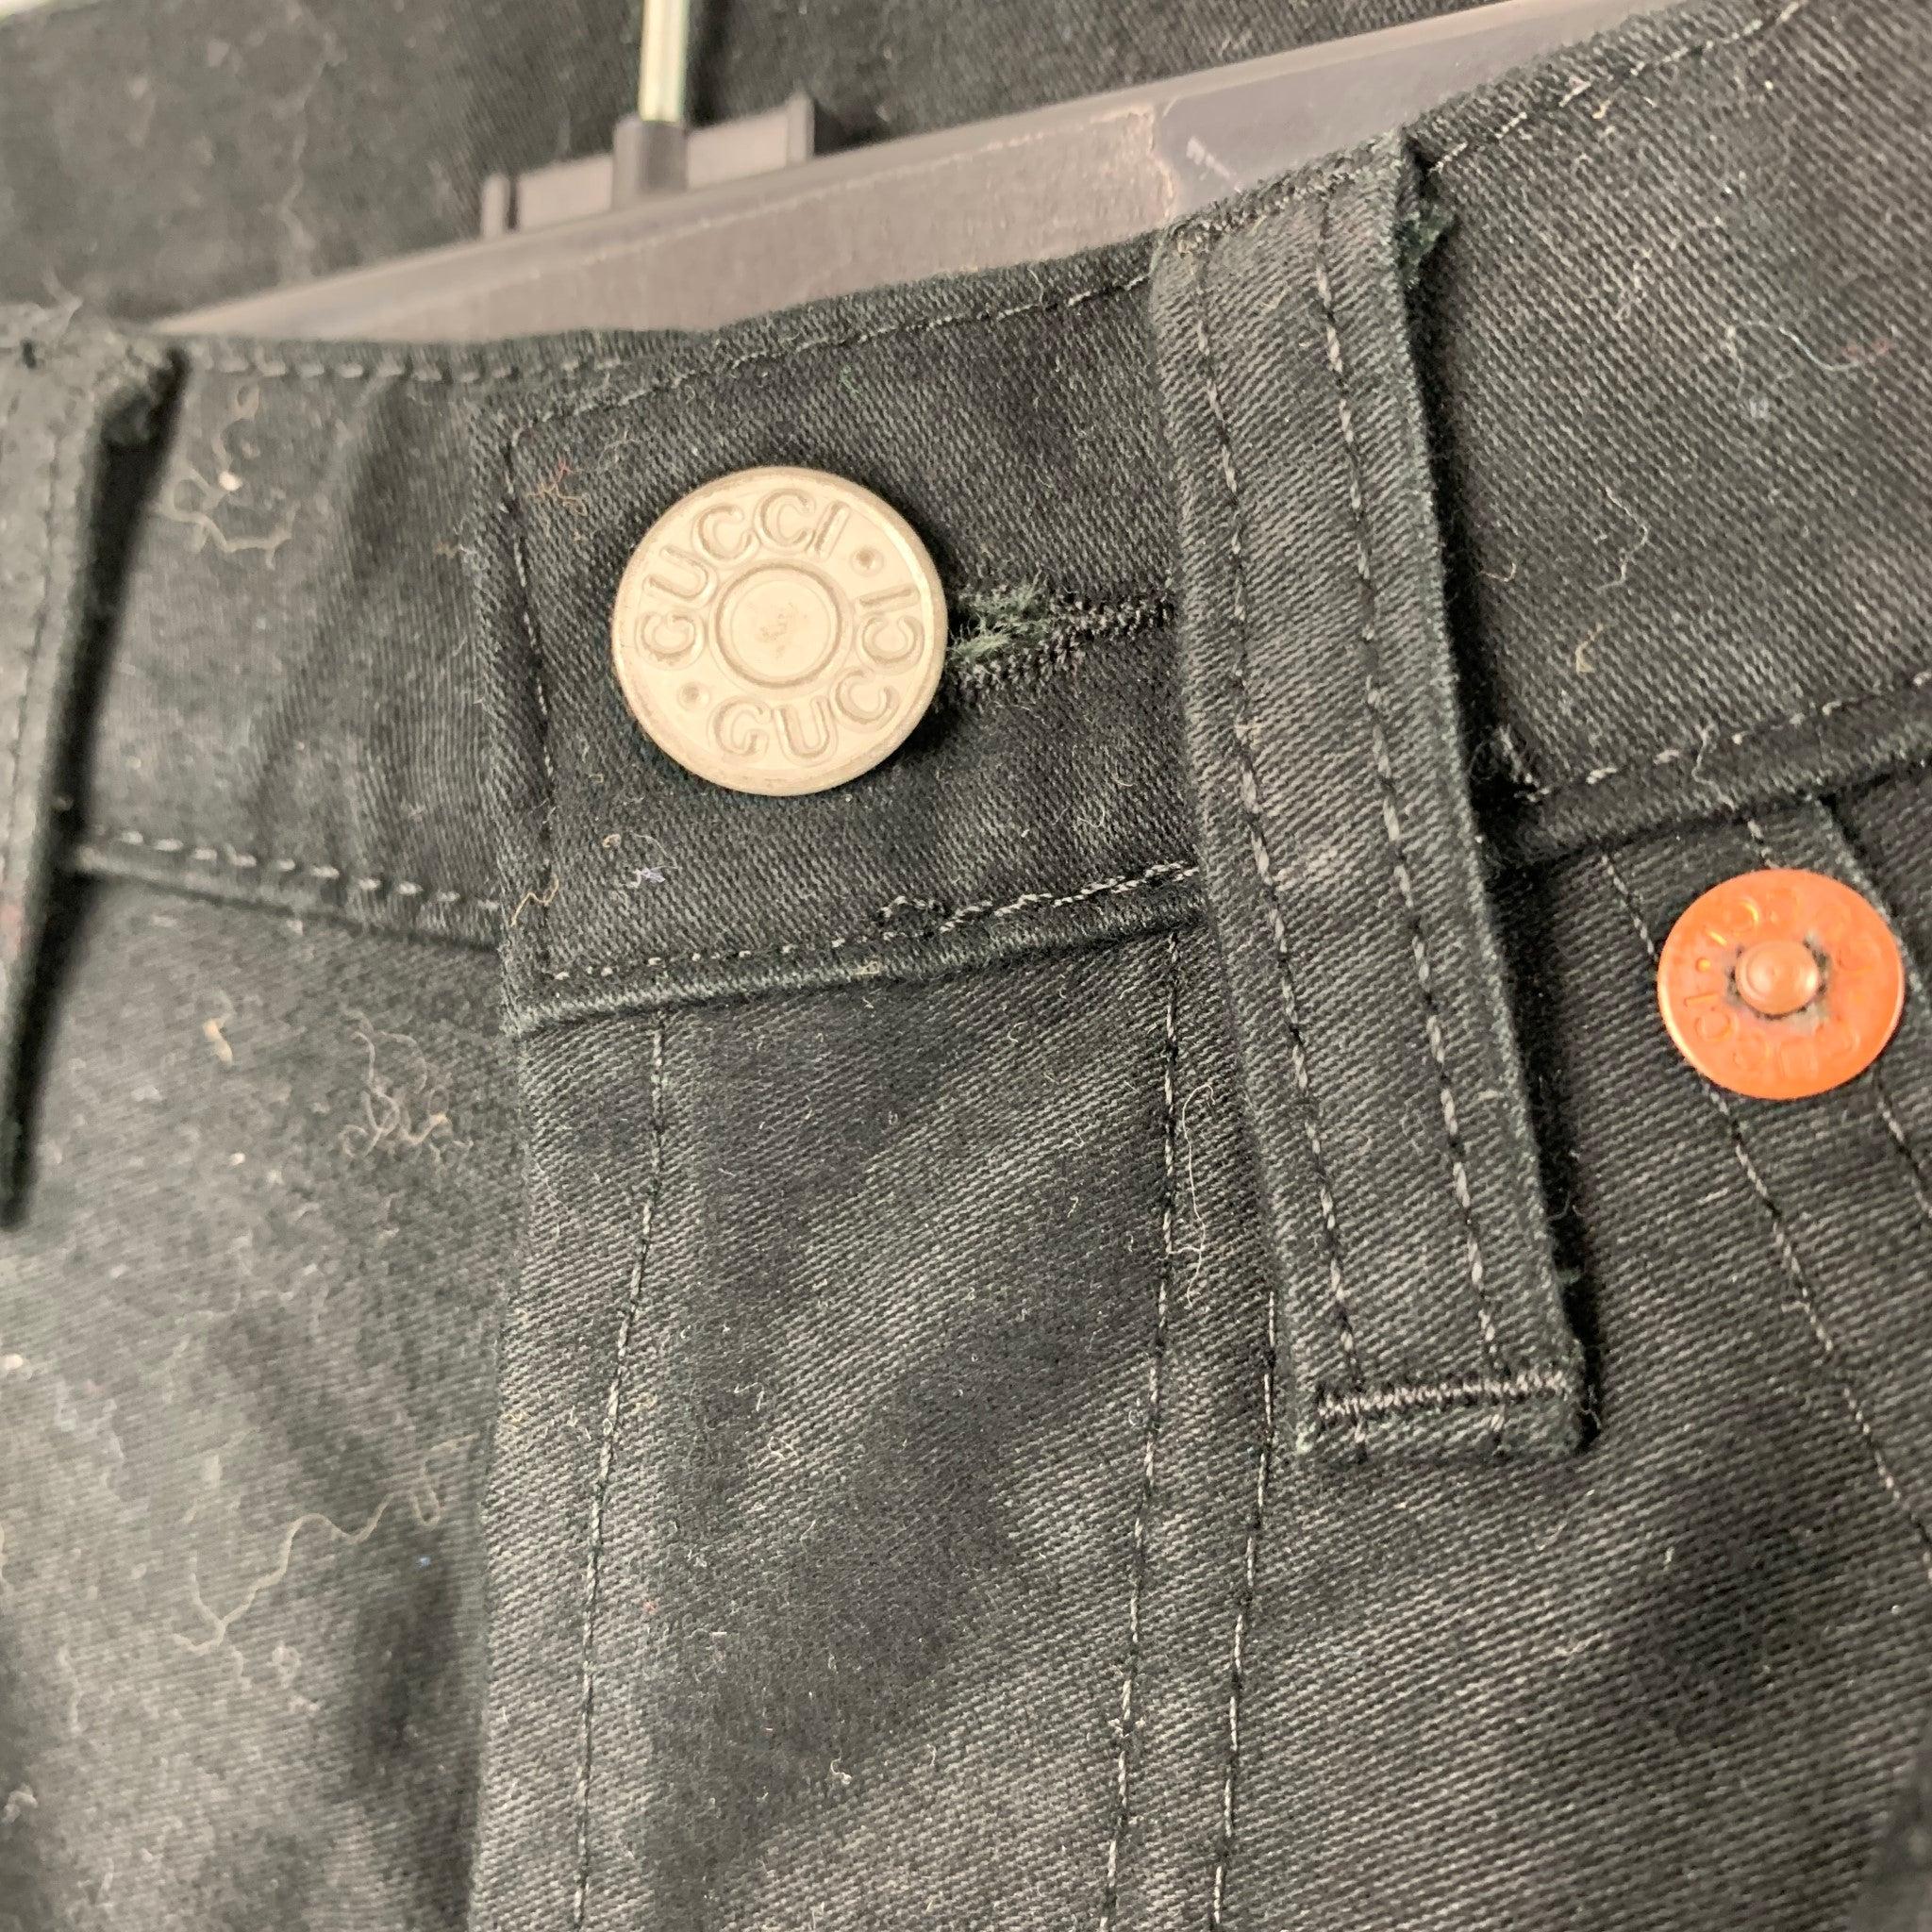 GUCCI jeans comes in a black cotton woven material featuring a wide leg, four pockets, bootcut style, and a button fly closure. Made in Italy. Very Good Pre-Owned Condition. 

Marked:   48 

Measurements: 
  Waist: 28 inches Rise: 8.5 inches Inseam: